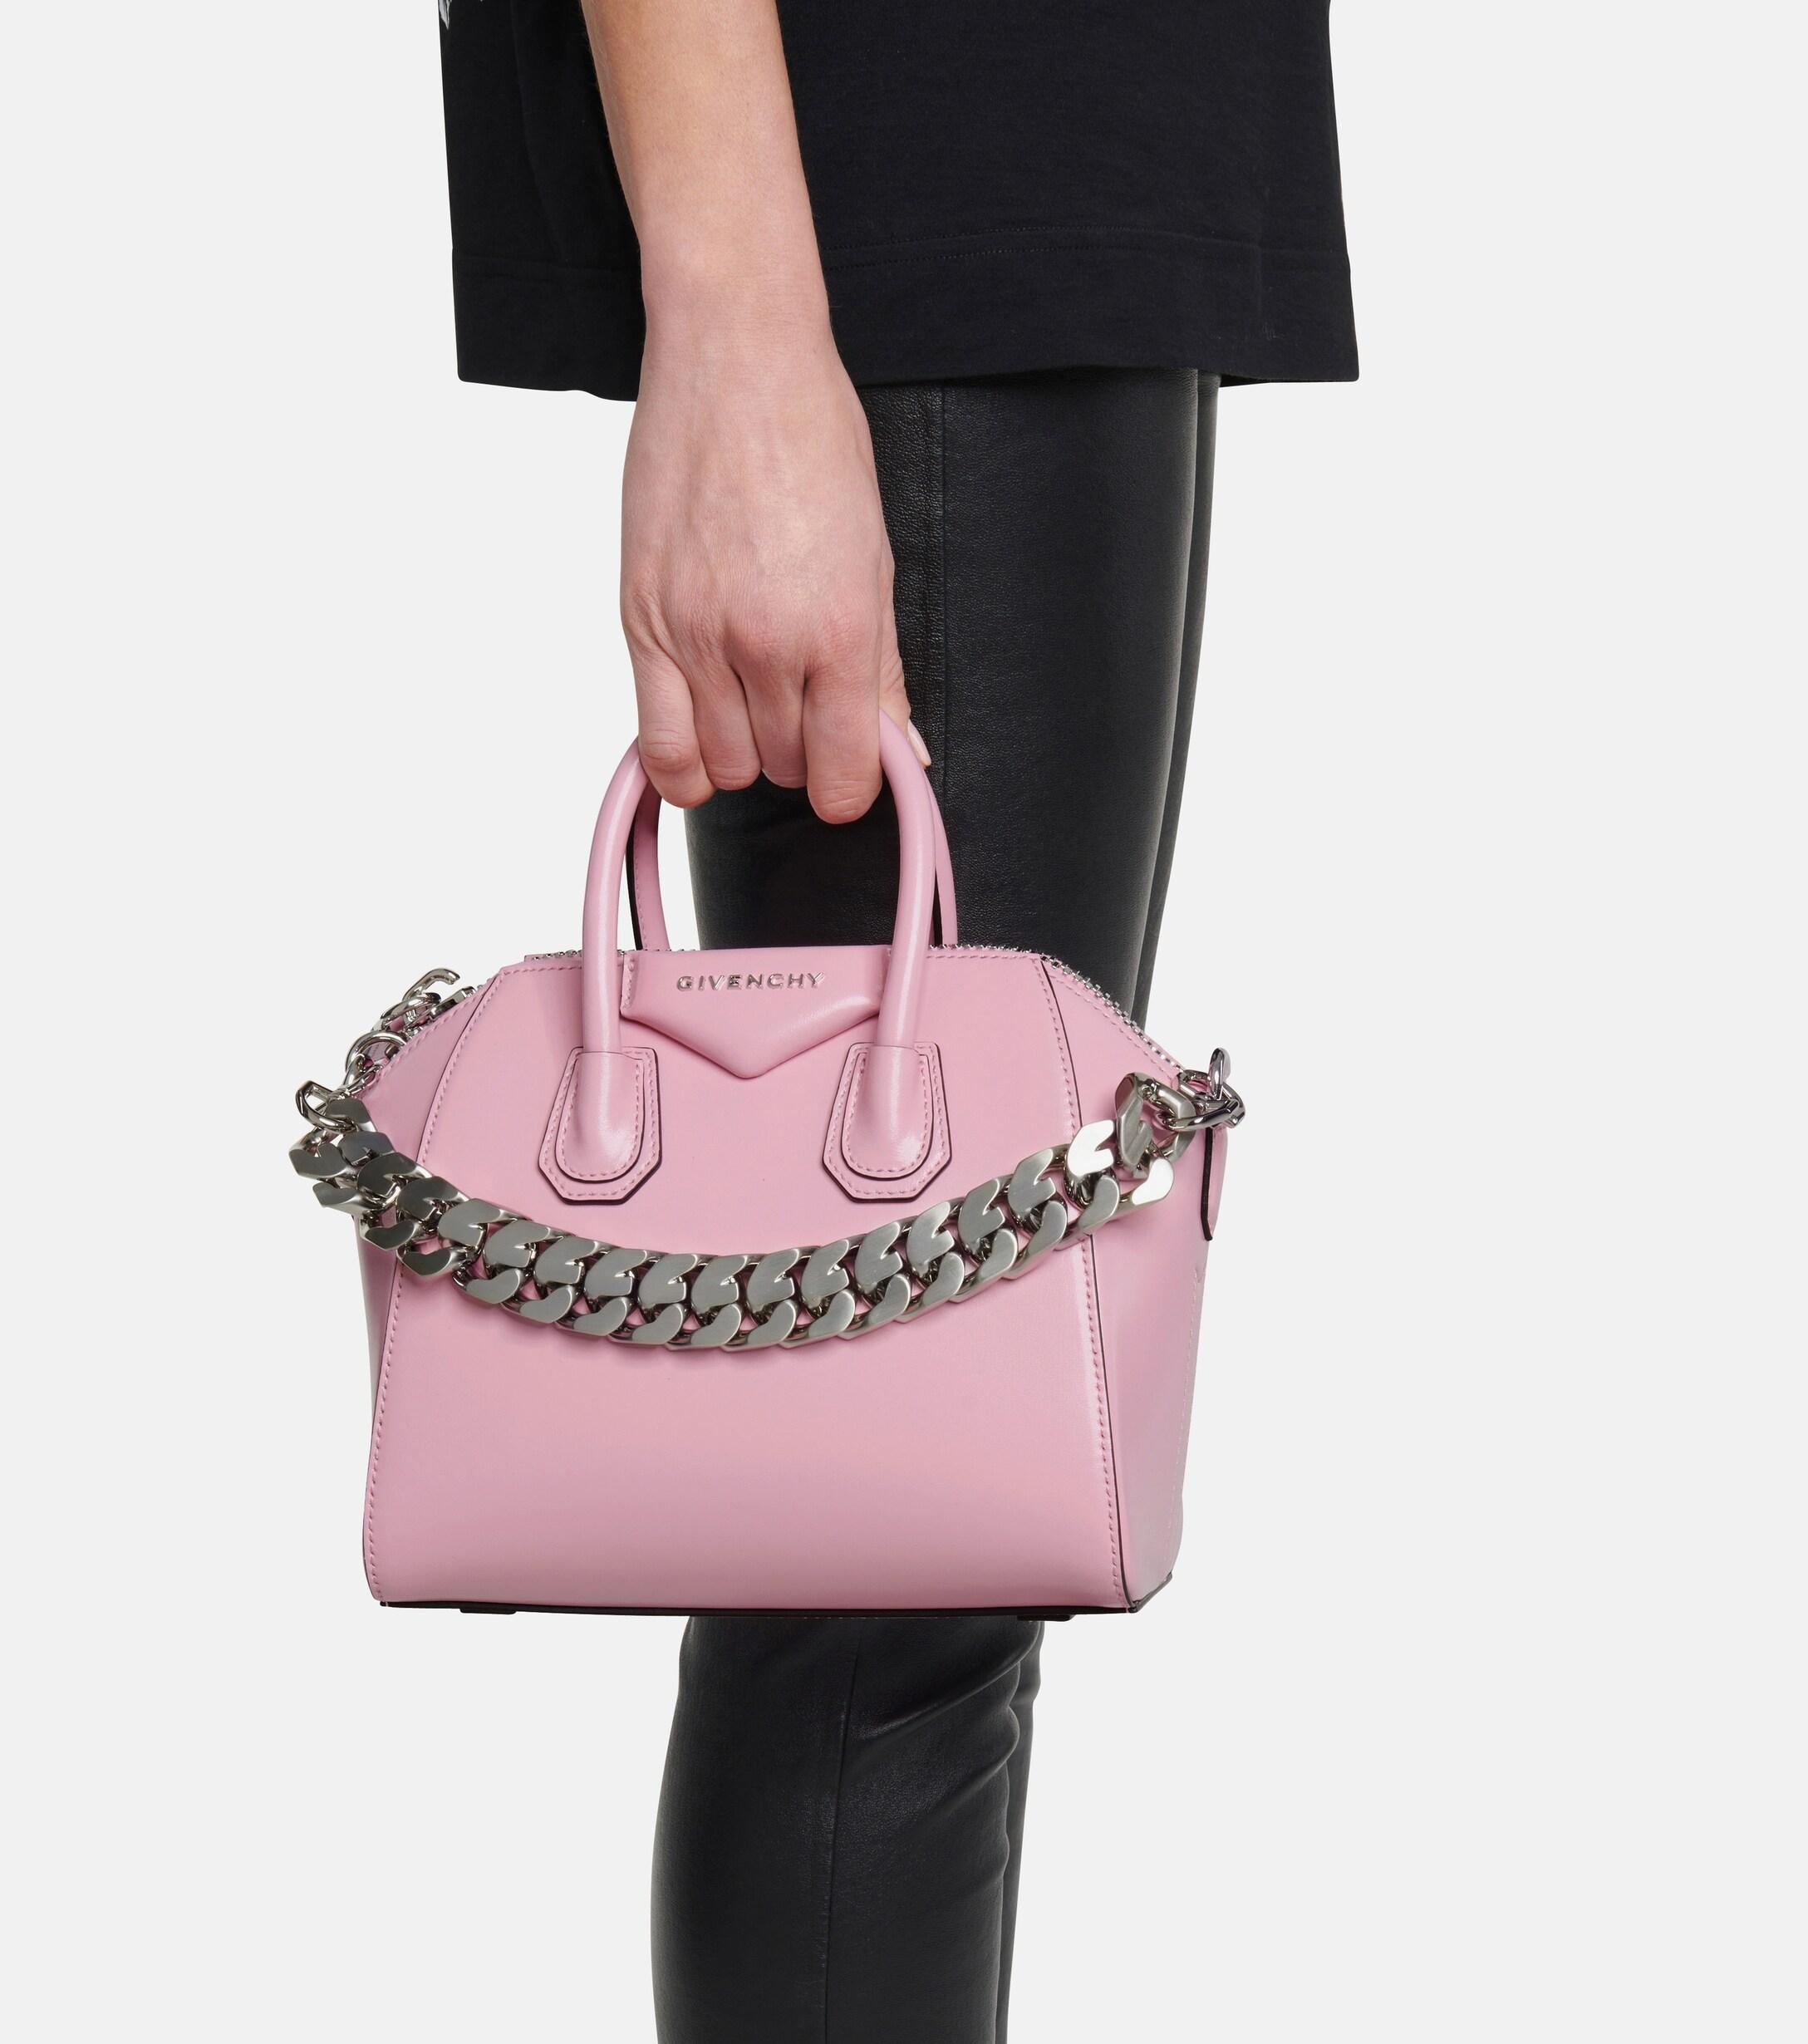 Givenchy Antigona Tote Small Light Pink in Leather with Silver